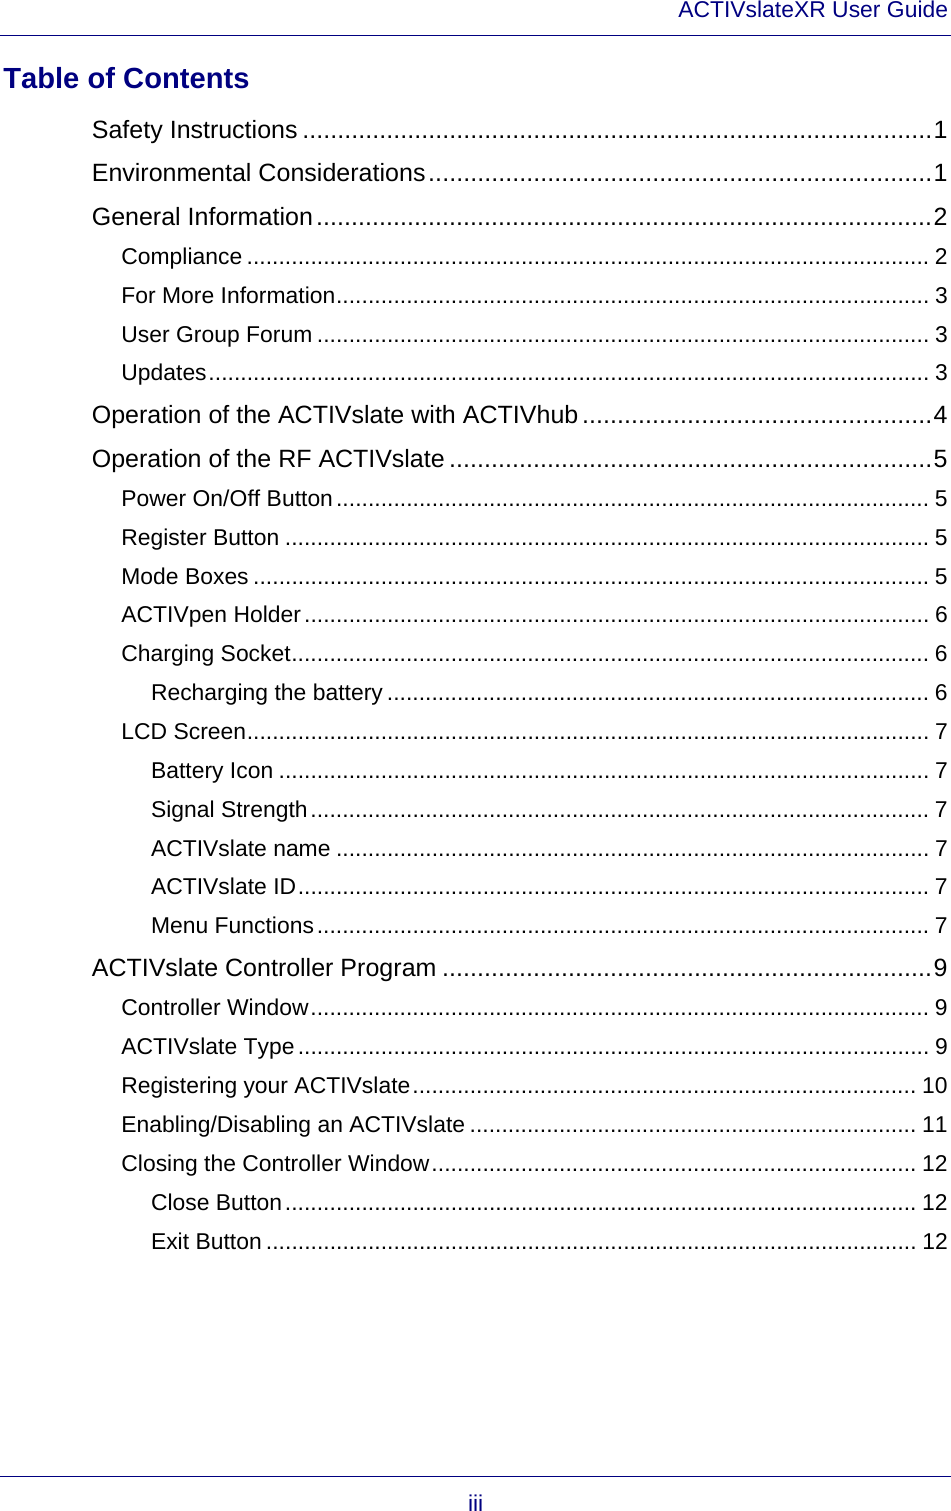 ACTIVslateXR User Guide iii Table of Contents Safety Instructions ..........................................................................................1 Environmental Considerations........................................................................1 General Information........................................................................................2 Compliance ........................................................................................................... 2 For More Information............................................................................................. 3 User Group Forum ................................................................................................ 3 Updates................................................................................................................. 3 Operation of the ACTIVslate with ACTIVhub..................................................4 Operation of the RF ACTIVslate .....................................................................5 Power On/Off Button............................................................................................. 5 Register Button ..................................................................................................... 5 Mode Boxes .......................................................................................................... 5 ACTIVpen Holder.................................................................................................. 6 Charging Socket.................................................................................................... 6 Recharging the battery ..................................................................................... 6 LCD Screen........................................................................................................... 7 Battery Icon ...................................................................................................... 7 Signal Strength................................................................................................. 7 ACTIVslate name ............................................................................................. 7 ACTIVslate ID................................................................................................... 7 Menu Functions................................................................................................ 7 ACTIVslate Controller Program ......................................................................9 Controller Window................................................................................................. 9 ACTIVslate Type................................................................................................... 9 Registering your ACTIVslate............................................................................... 10 Enabling/Disabling an ACTIVslate ...................................................................... 11 Closing the Controller Window............................................................................ 12 Close Button................................................................................................... 12 Exit Button ...................................................................................................... 12  